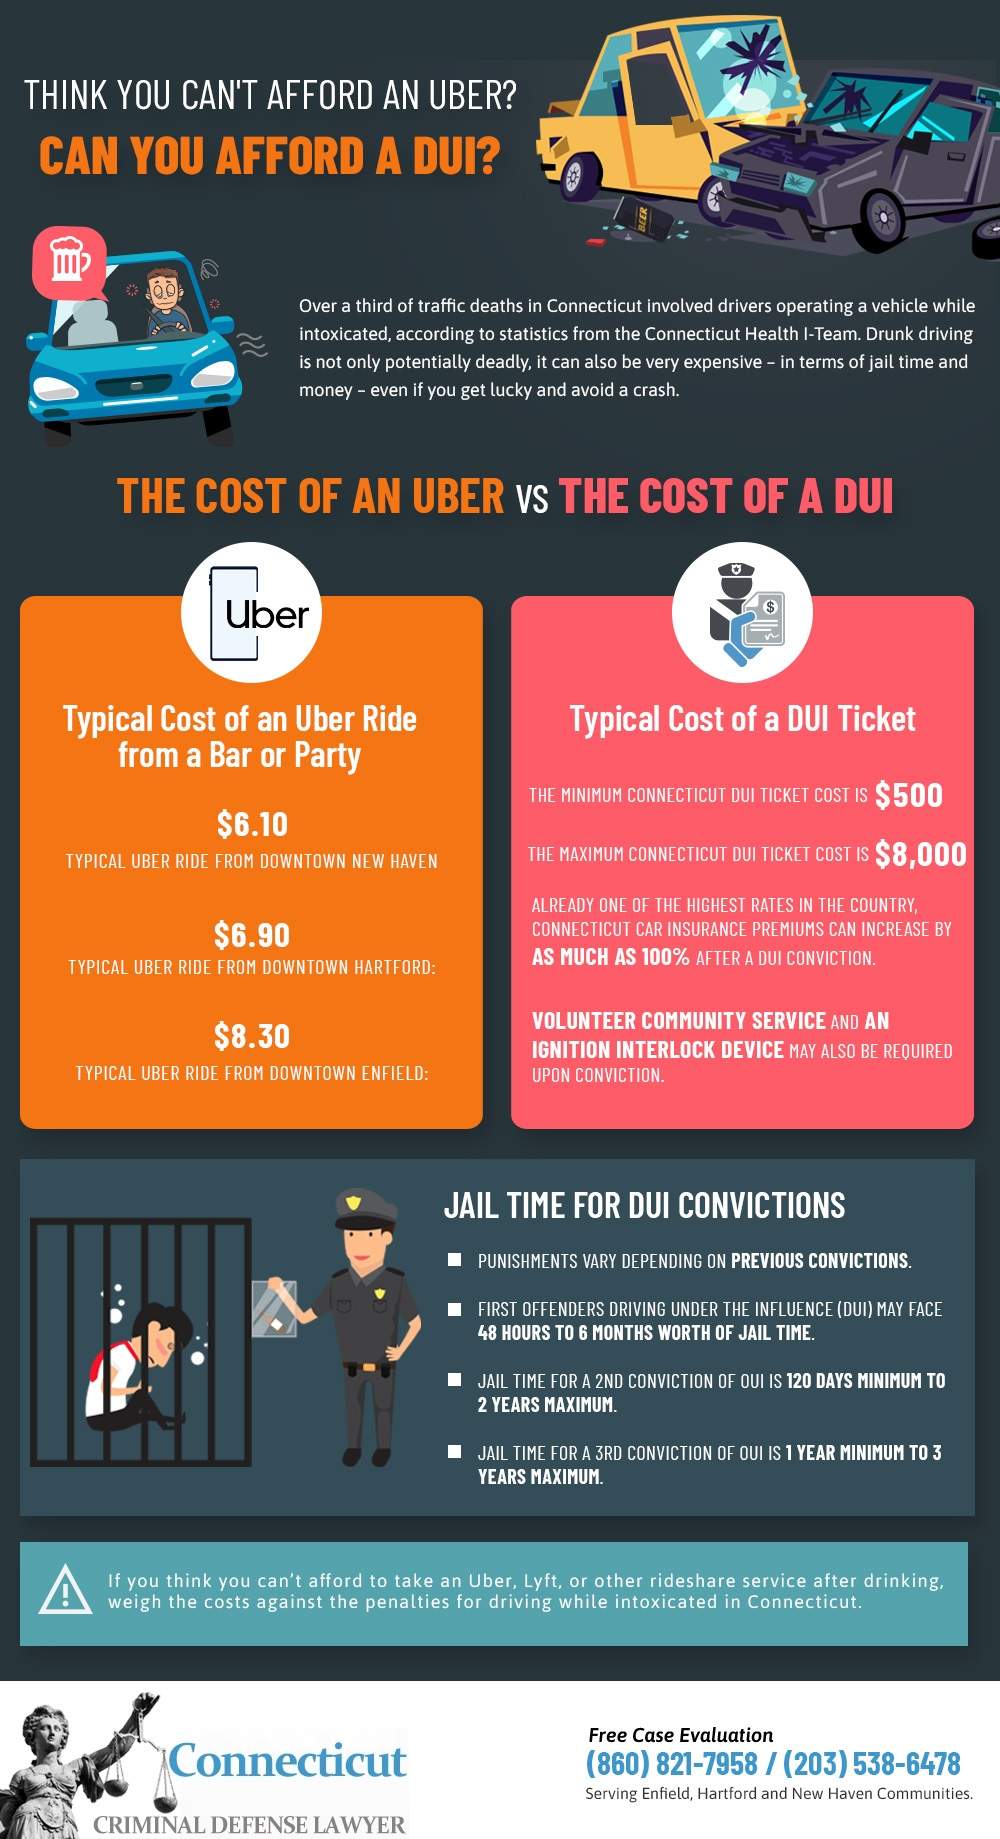 Effect of DUI to Most People Who Drive